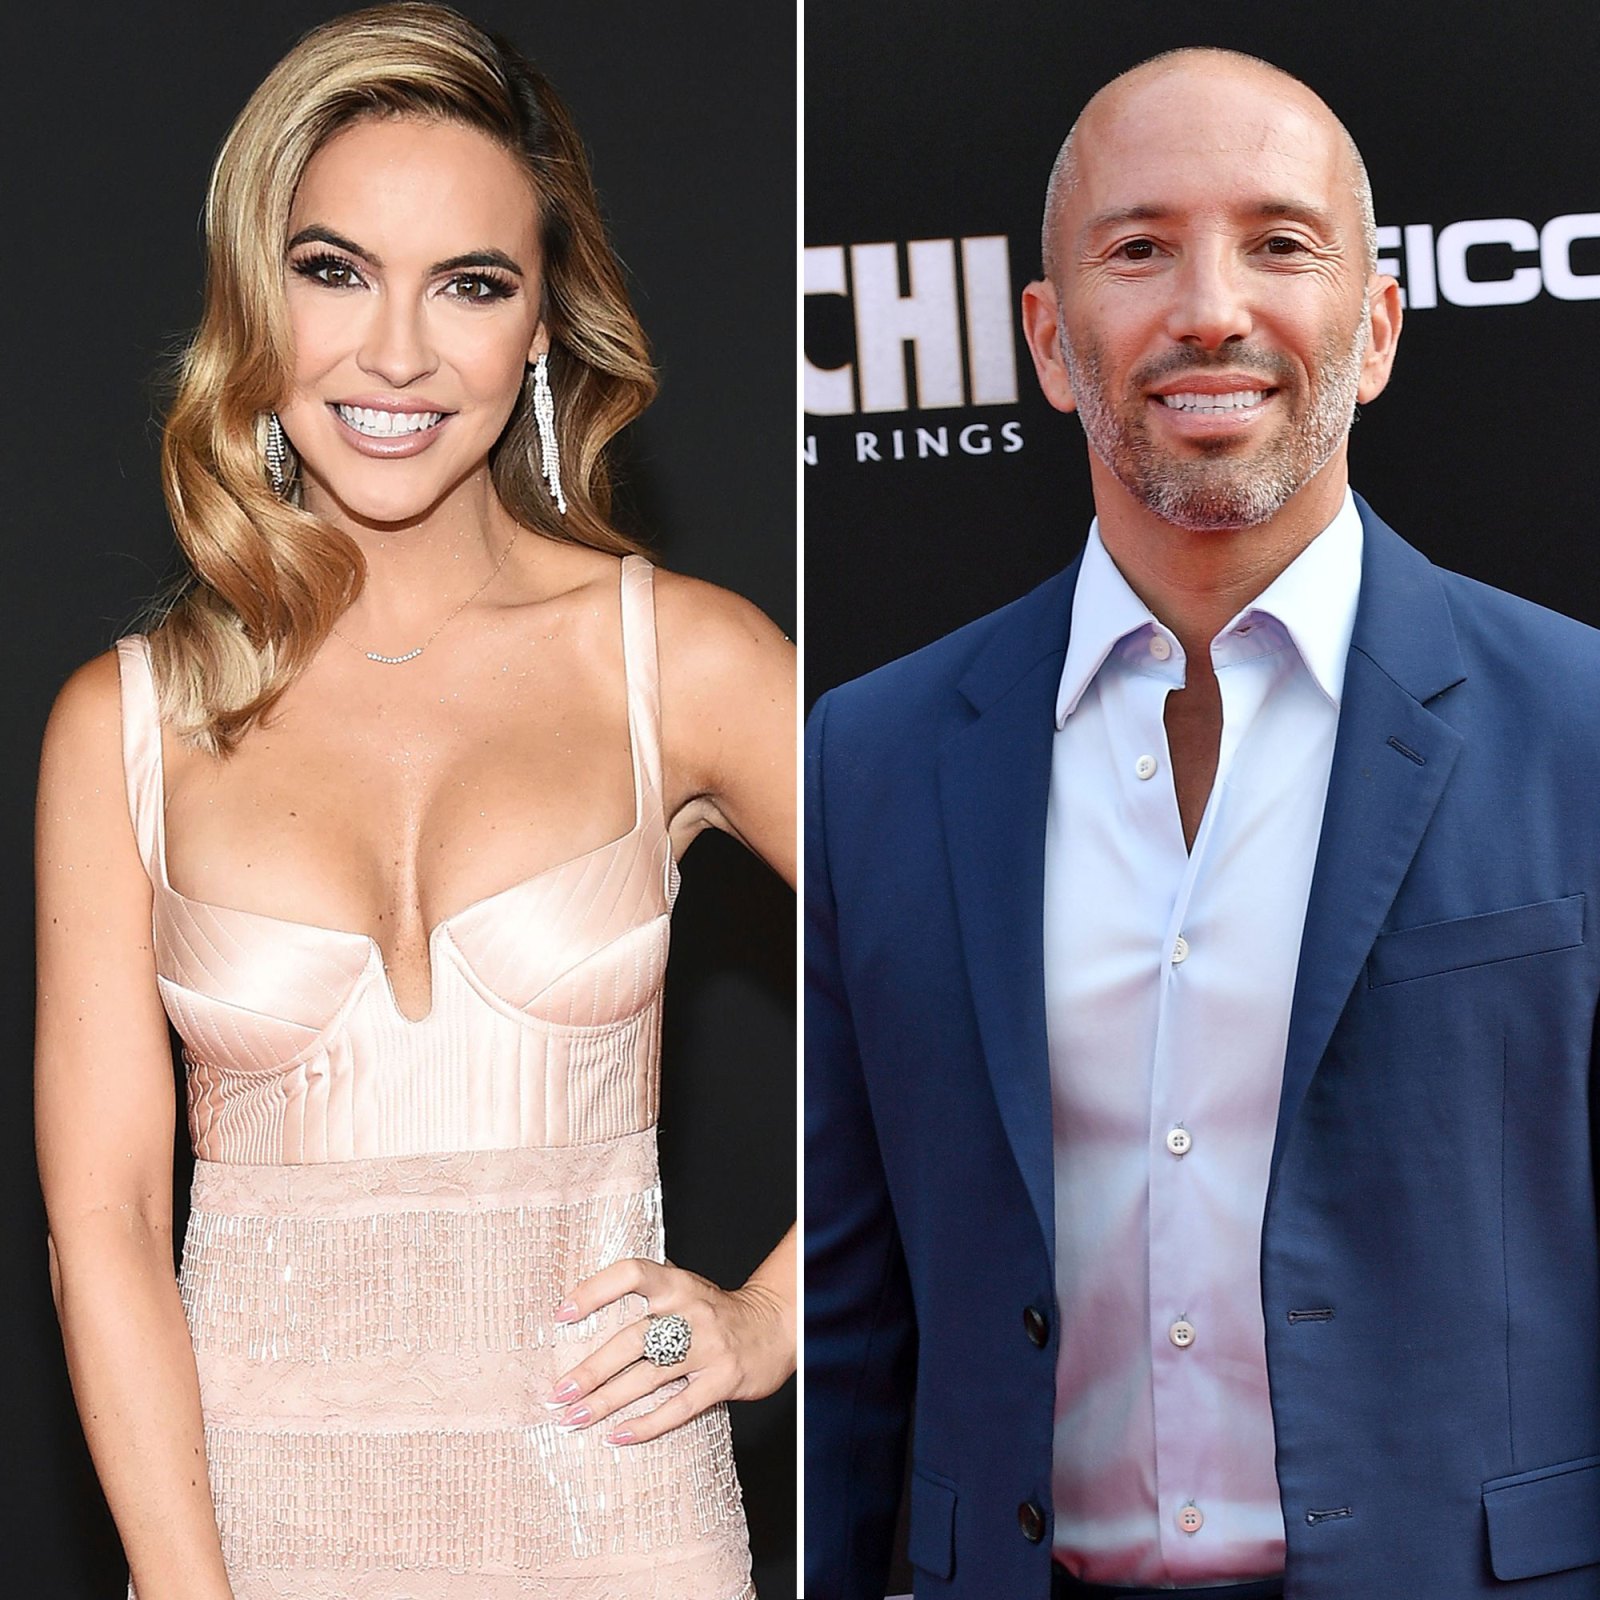 Selling Sunset Stars Reacts to Chrishell Stause and Jason Oppenheim's Split See What They Said